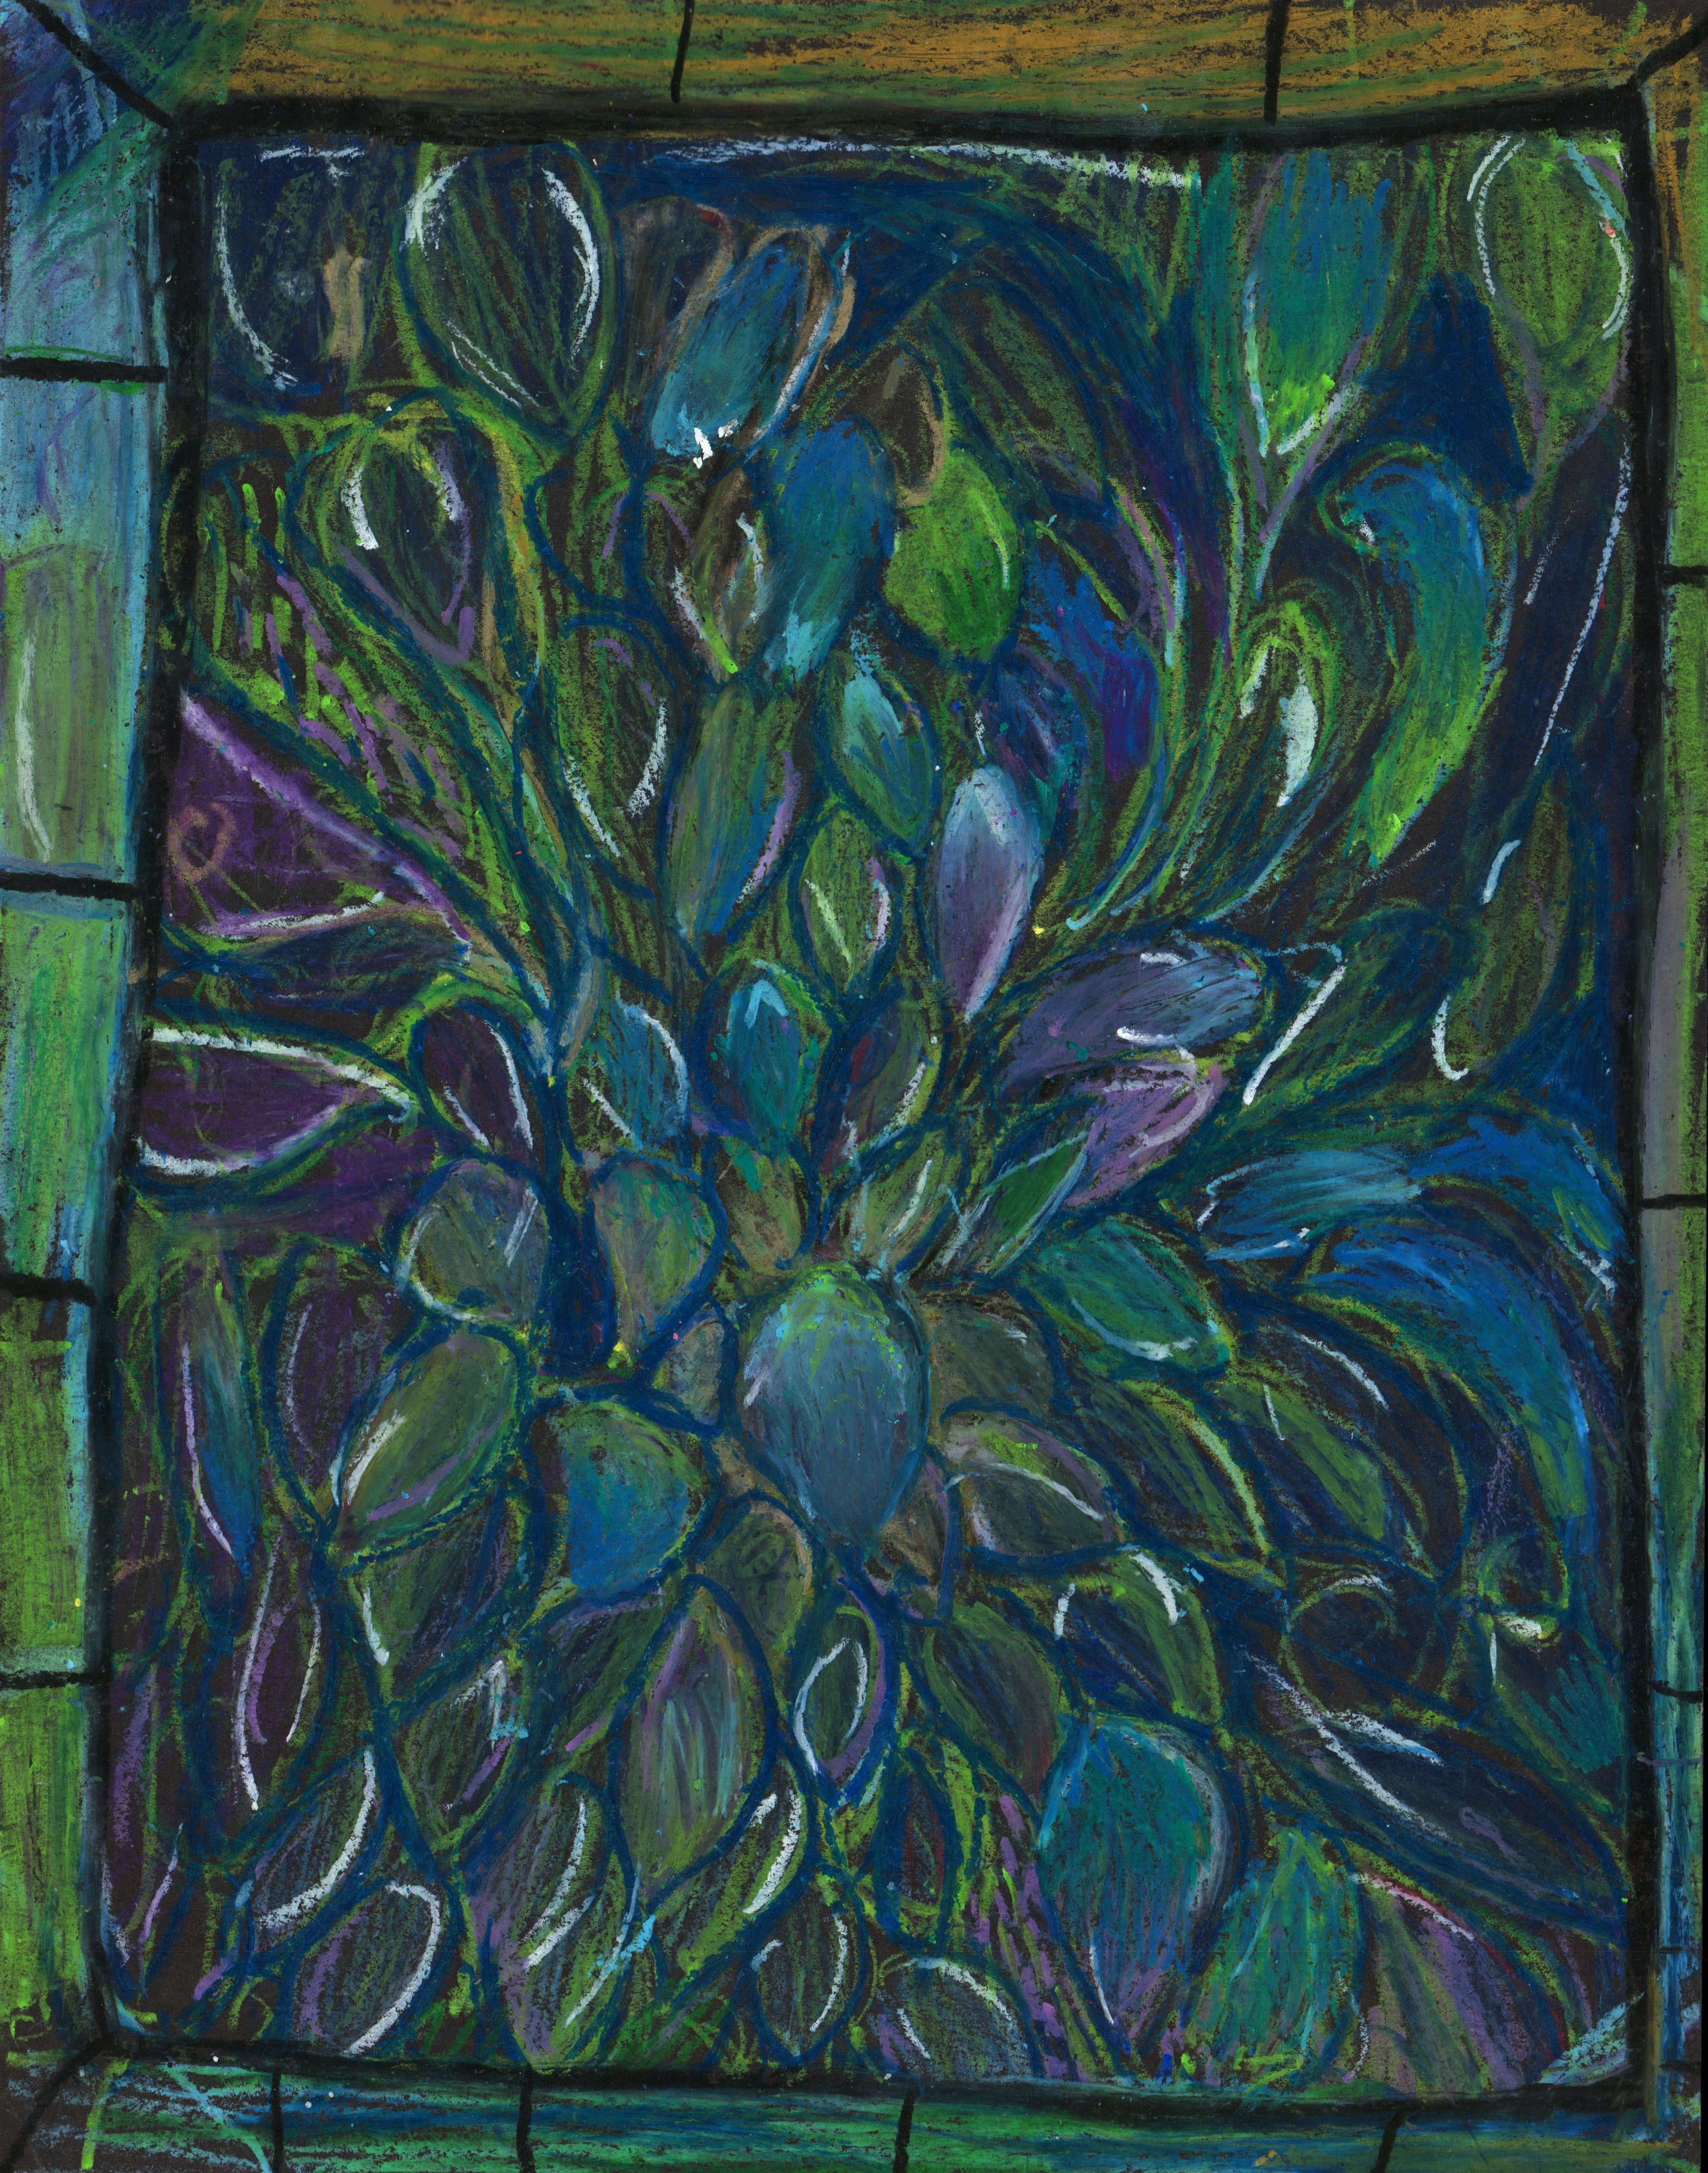 Oil pastel drawing of a stained glass window and its rectangular frame. The stained glass is composed entirely of a dense pattern of  blue, green, and purple abstract water droplets accented with dark blue outlines.